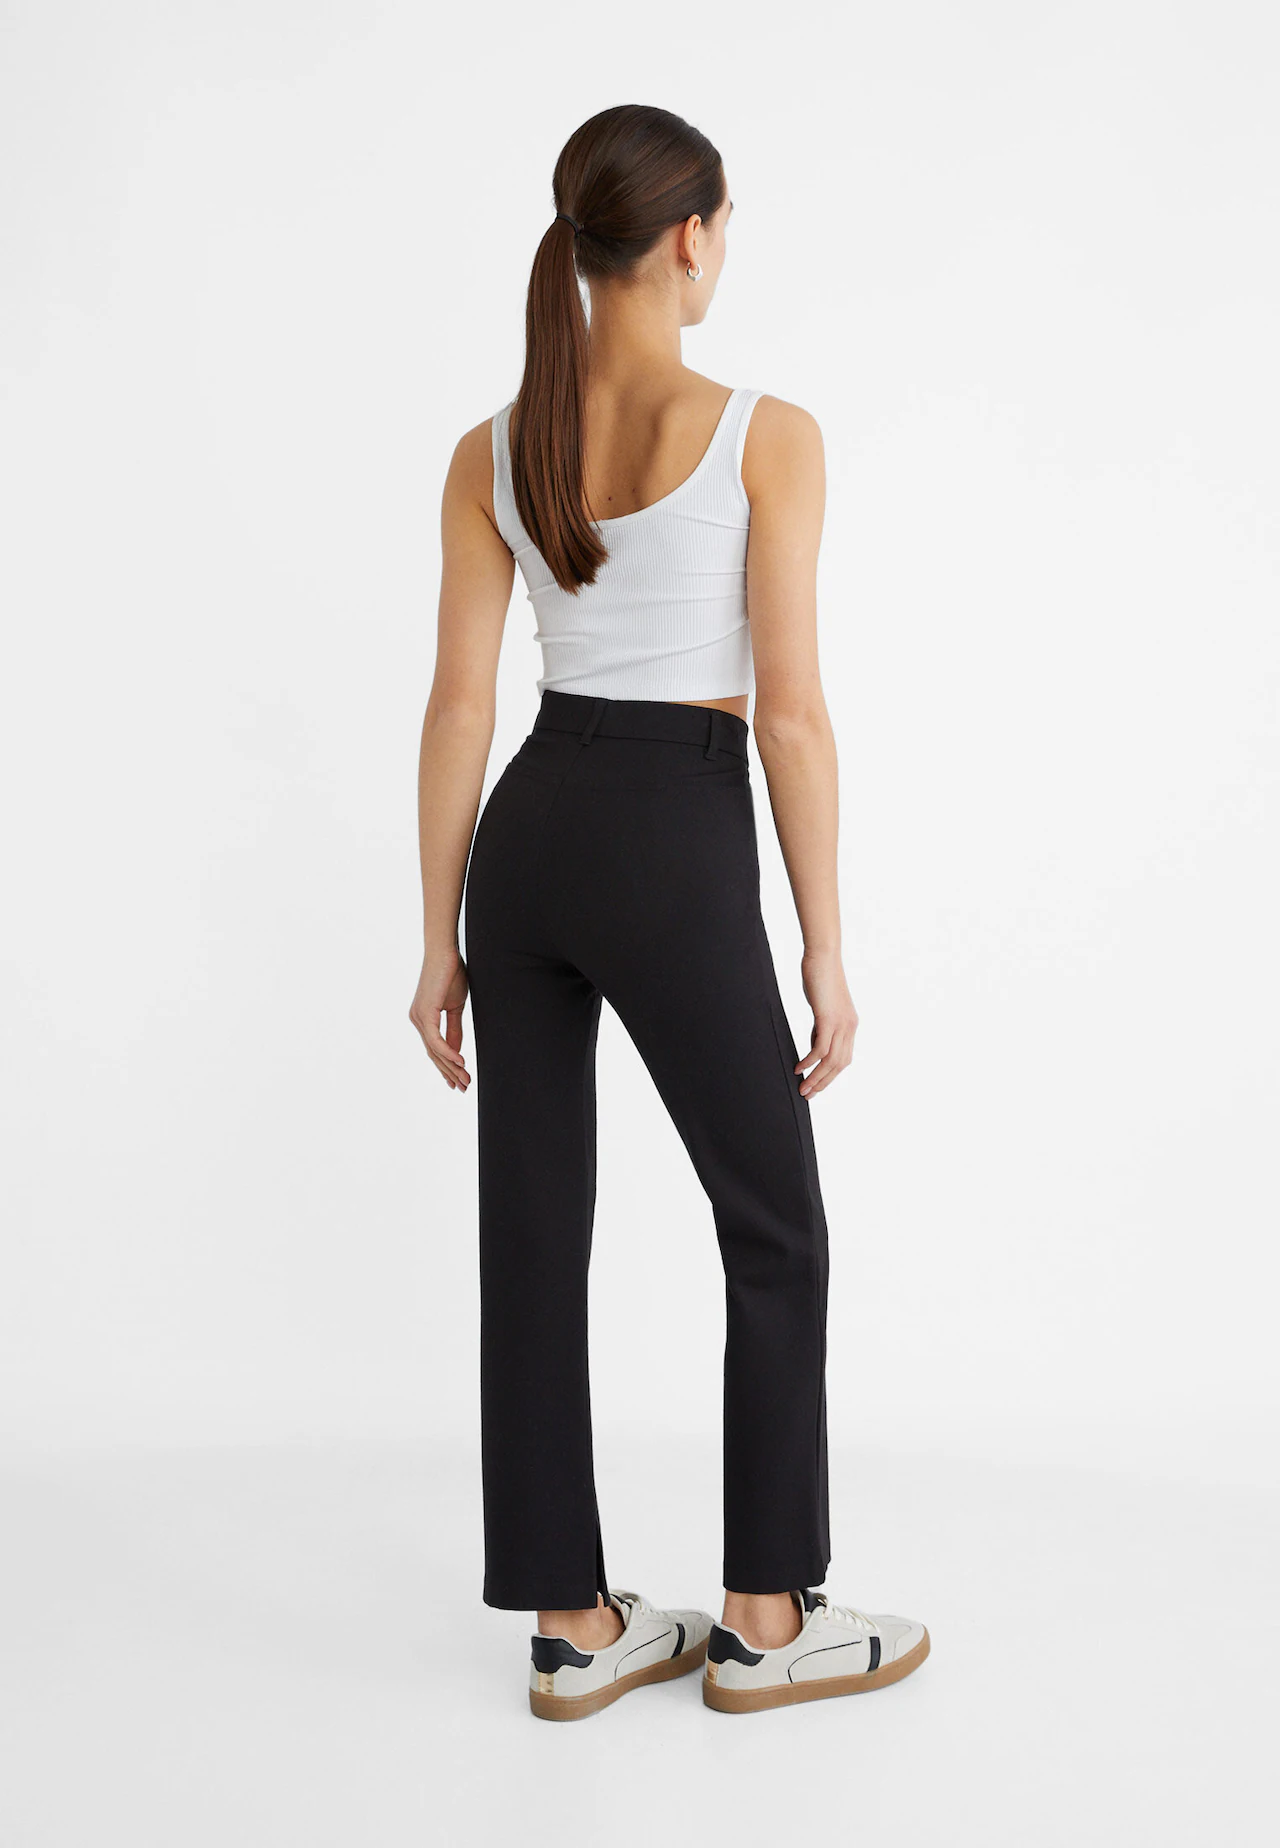 MINI FLARE TROUSERS - Oyster White